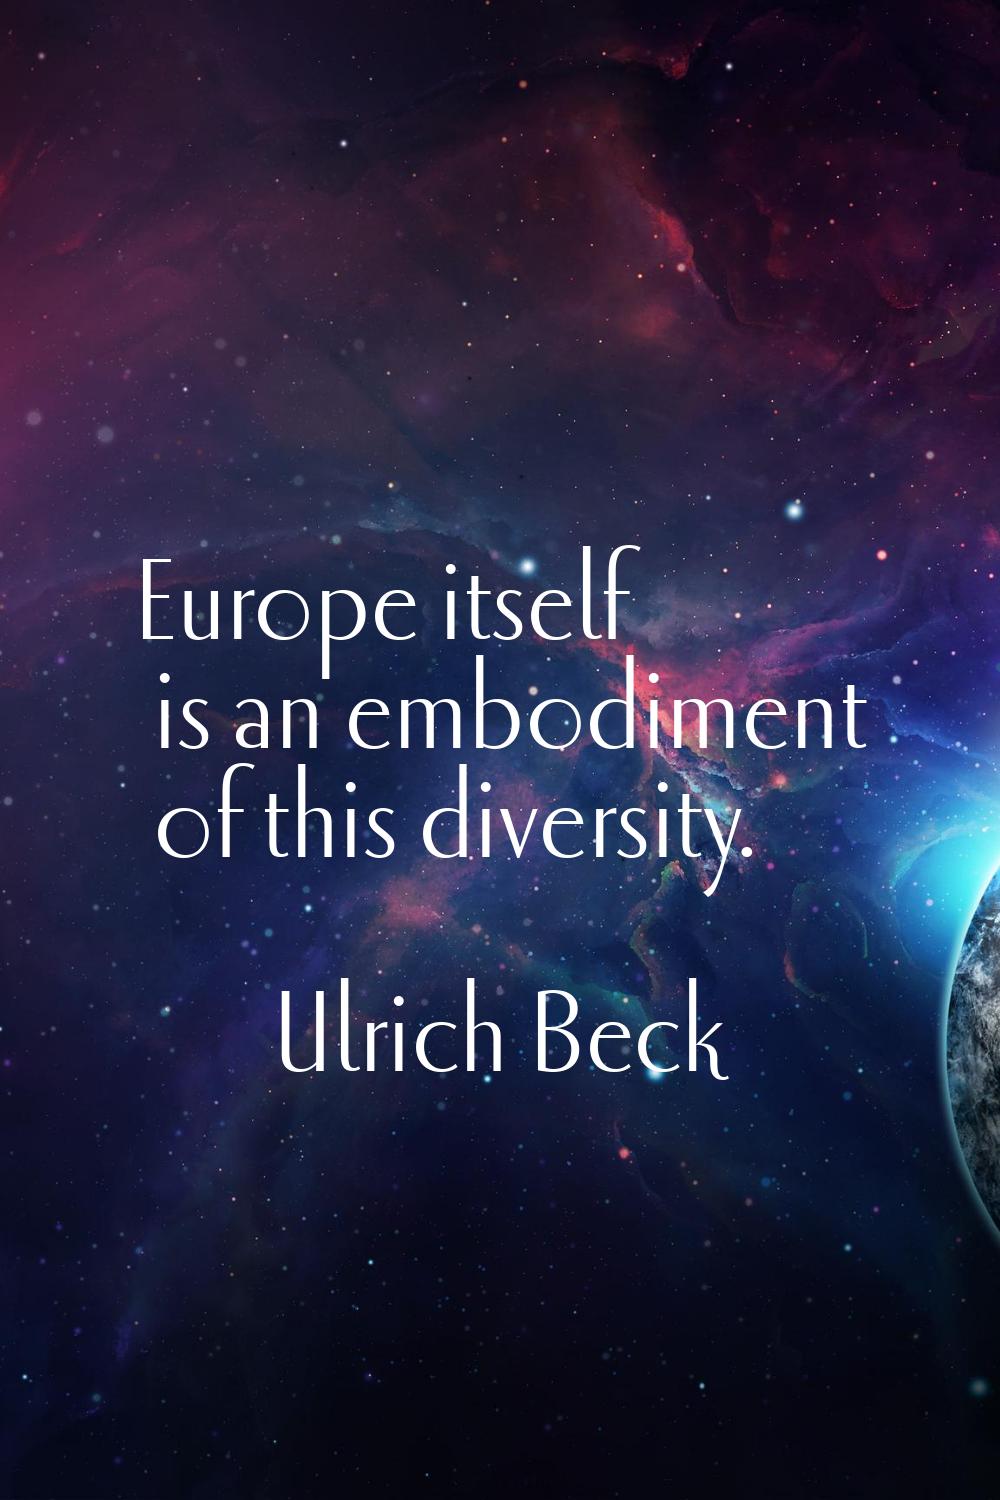 Europe itself is an embodiment of this diversity.